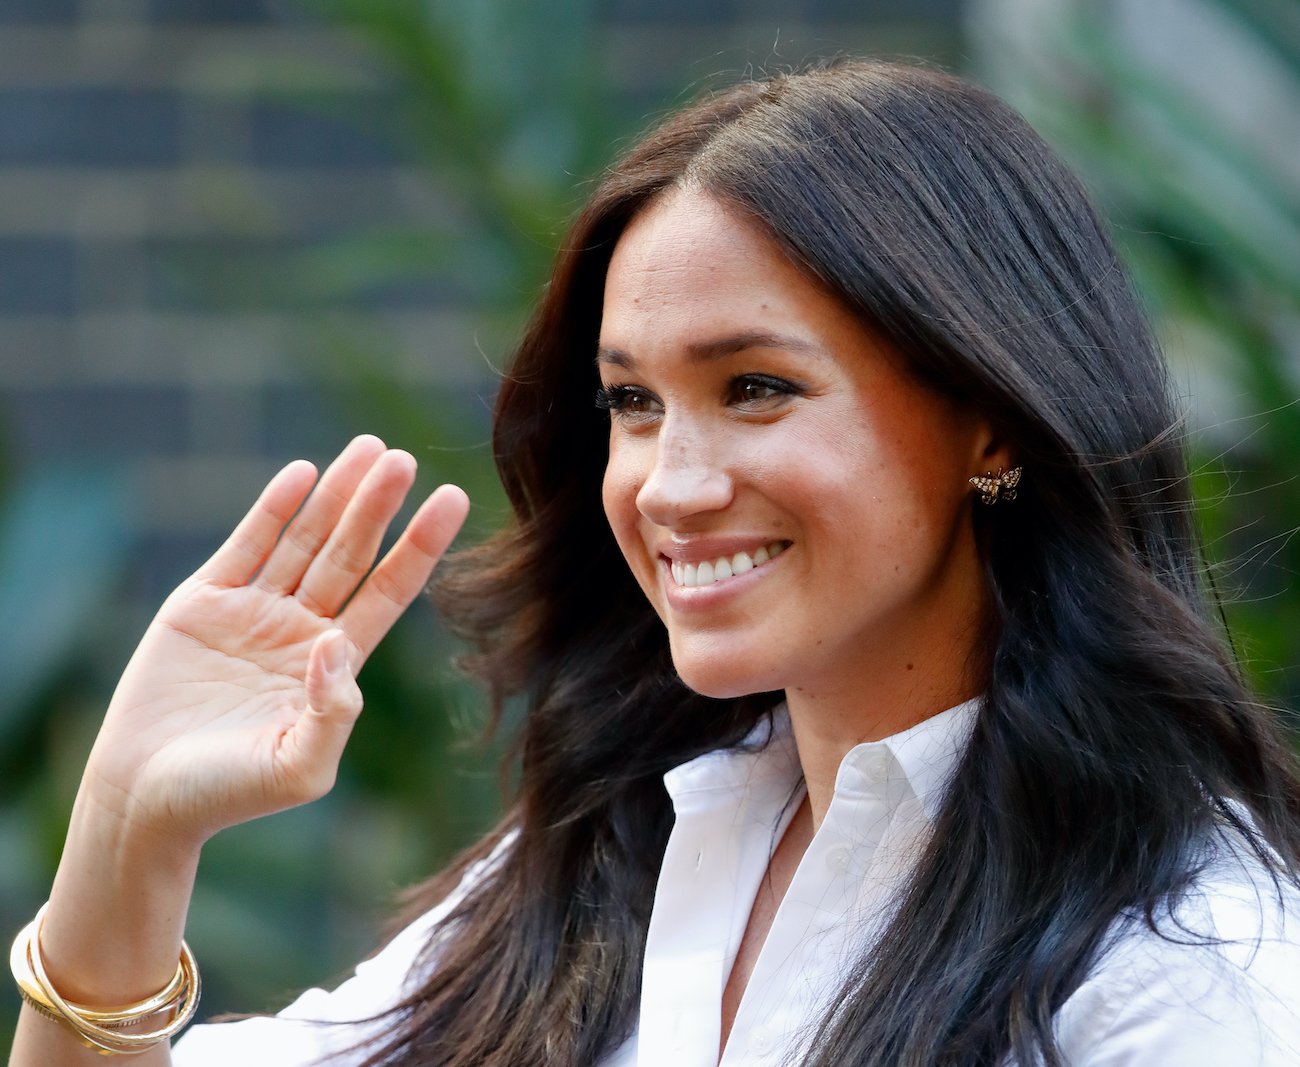 Meghan Markle at the launch of Smart Works capsule collection in 2019